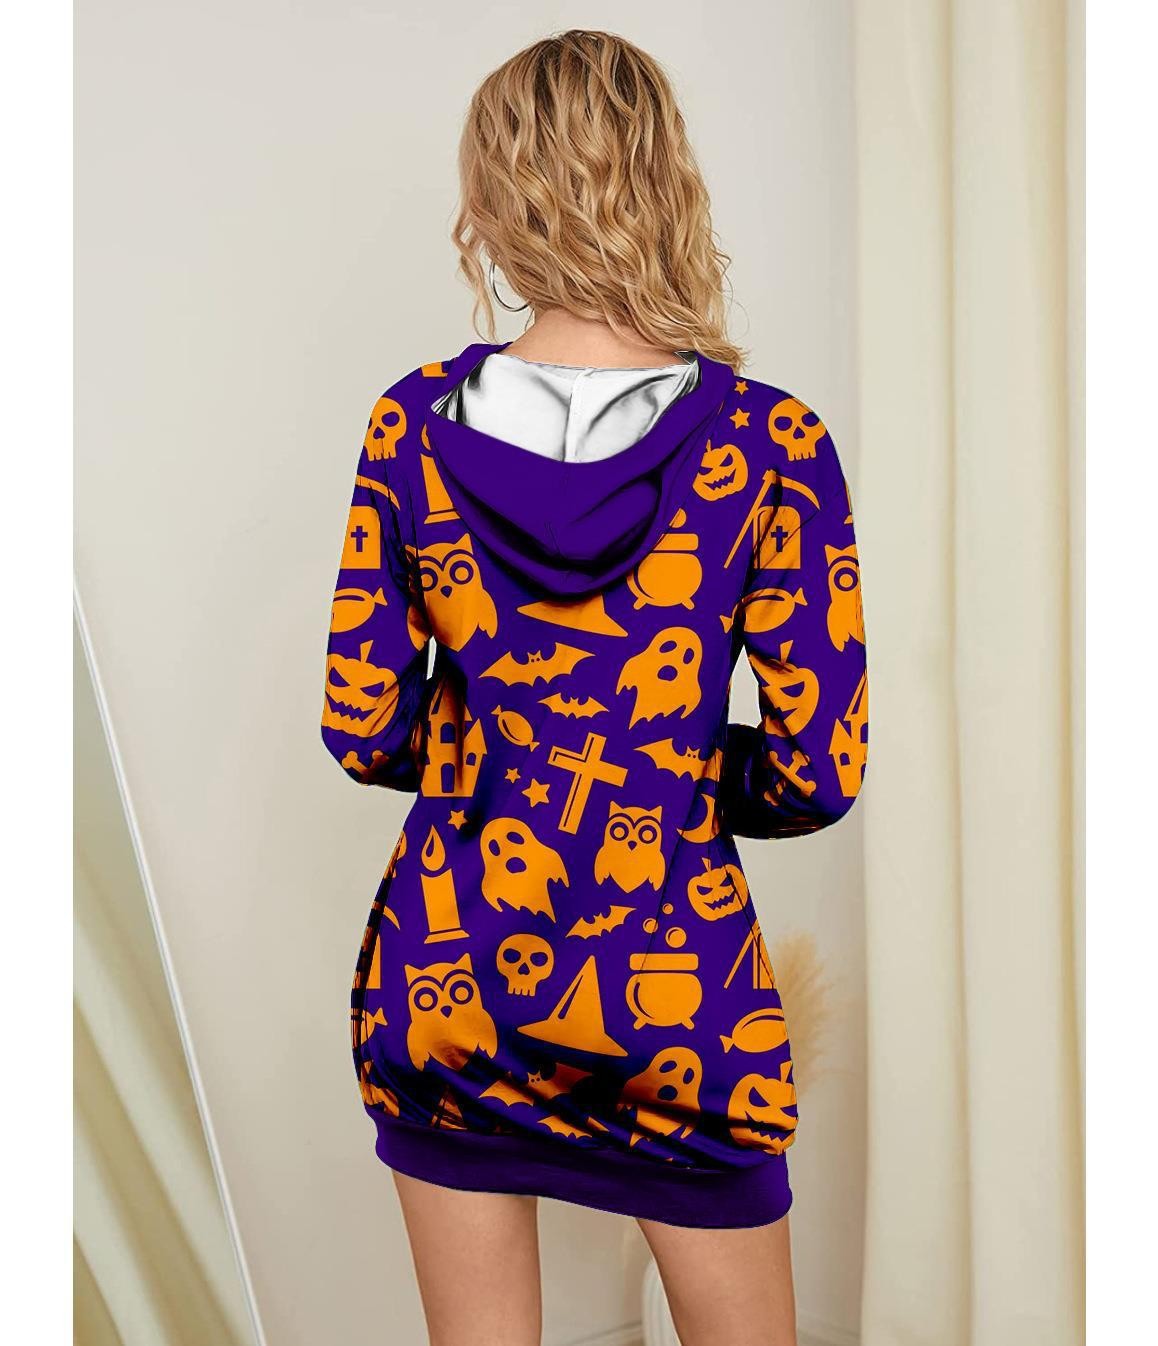 Halloween Pumpkin Design Pullover Hoodies for Women-Shirts & Tops-Free Shipping at meselling99